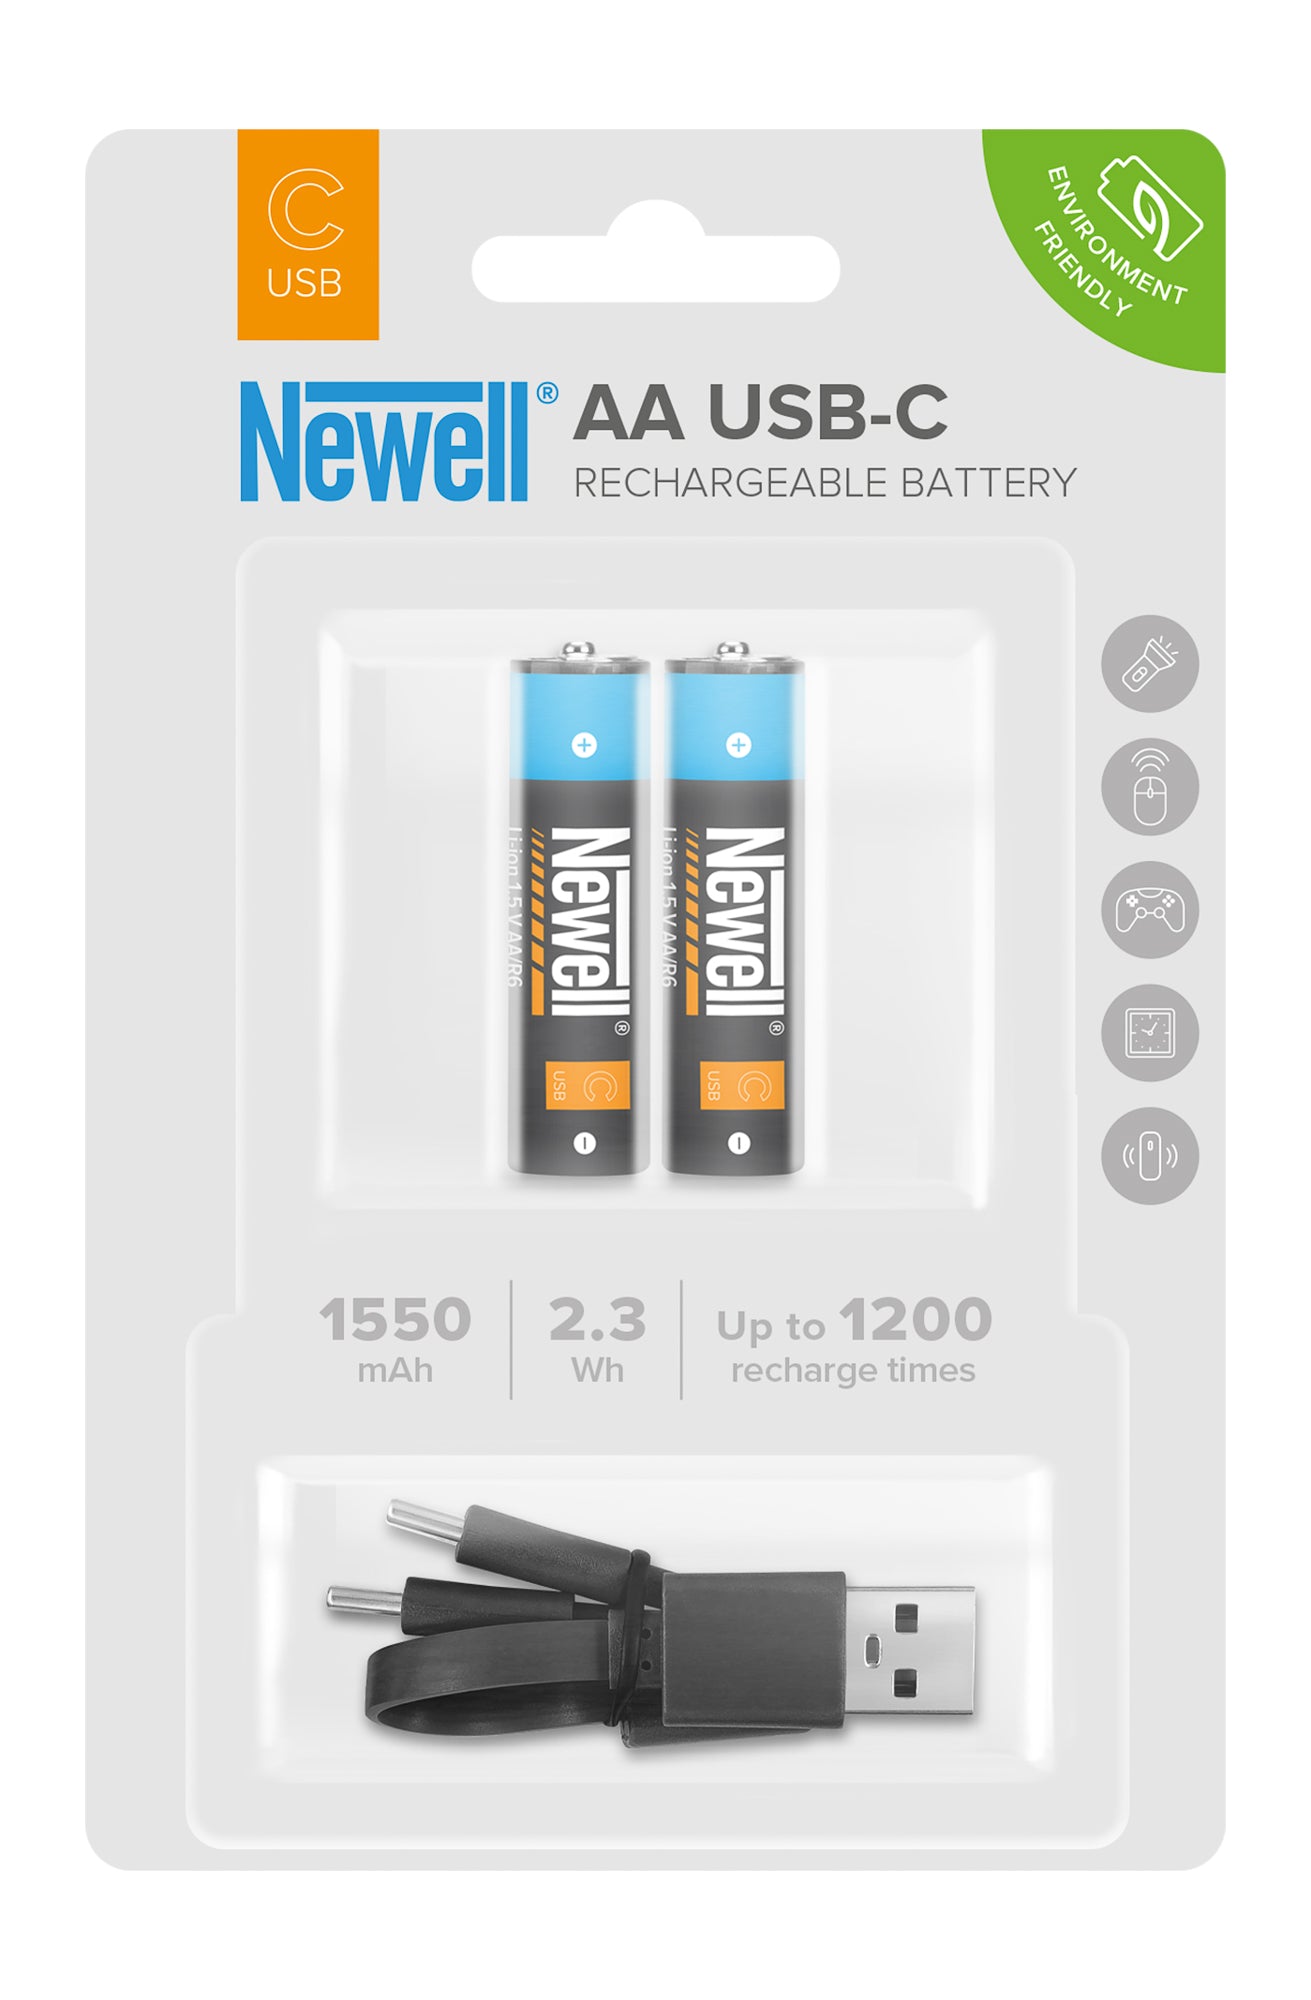 Newell AA USB-C Onboard Lithium Ion 1550mAh Battery - DIRECT CHARGE USB-C / NO CHARGER RQD